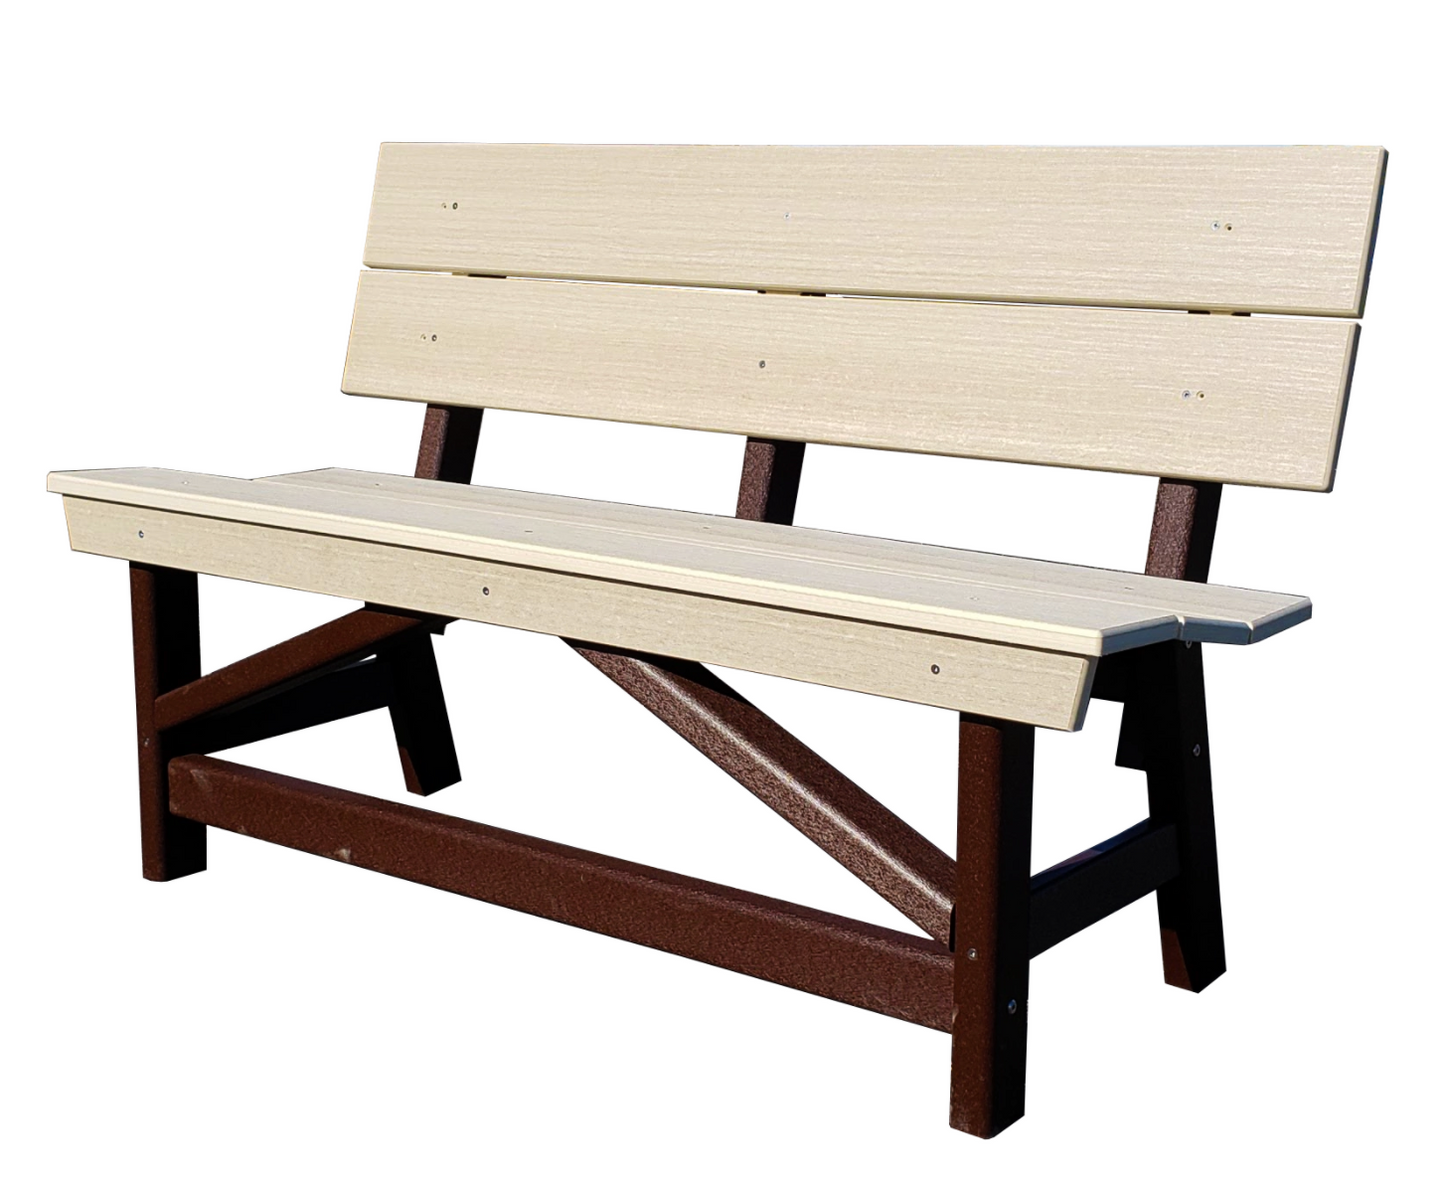 Perfect Choice Furniture Recycled Plastic Stanton Standard Dining Height Bench With Back - LEAD TIME TO SHIP 4 WEEKS OR LESS